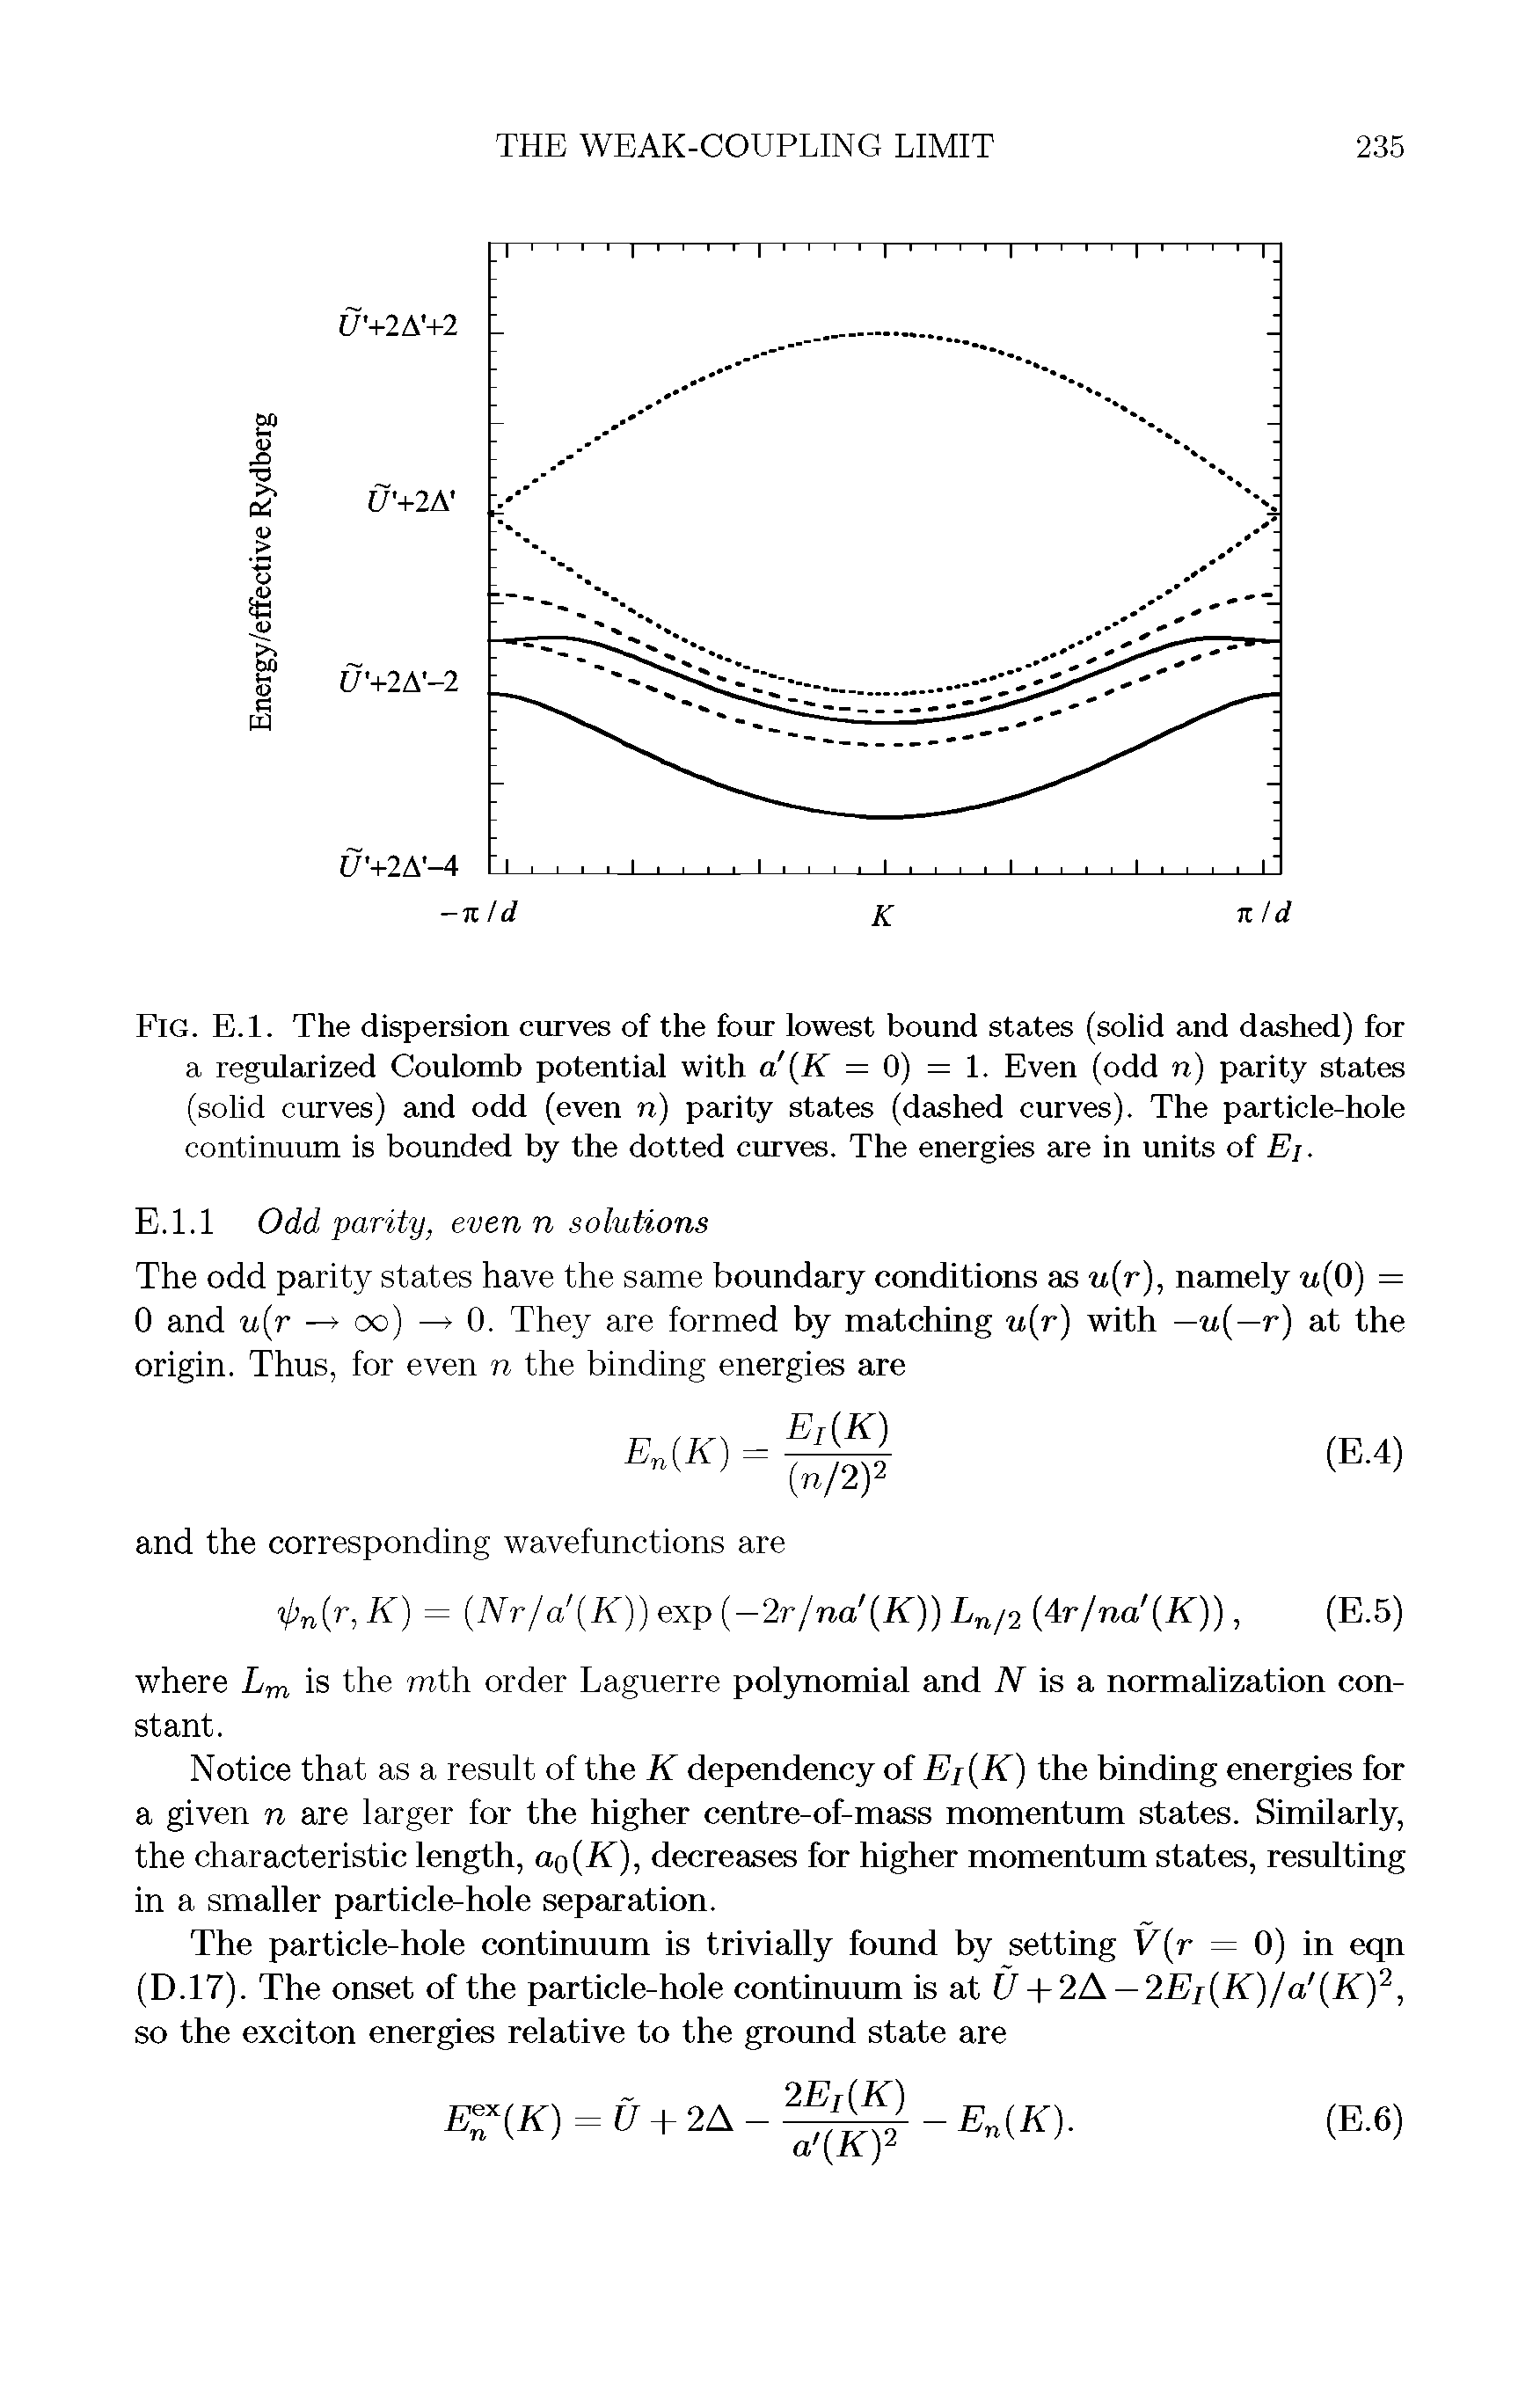 Fig. E.l. The dispersion curves of the four lowest bound states (solid and dashed) for a regularized Coulomb potential with a K = 0) = 1. Even (odd n) parity states (solid curves) and odd (even n) parity states (dashed curves). The particle-hole continuum is bounded by the dotted curves. The energies are in units of Ej.